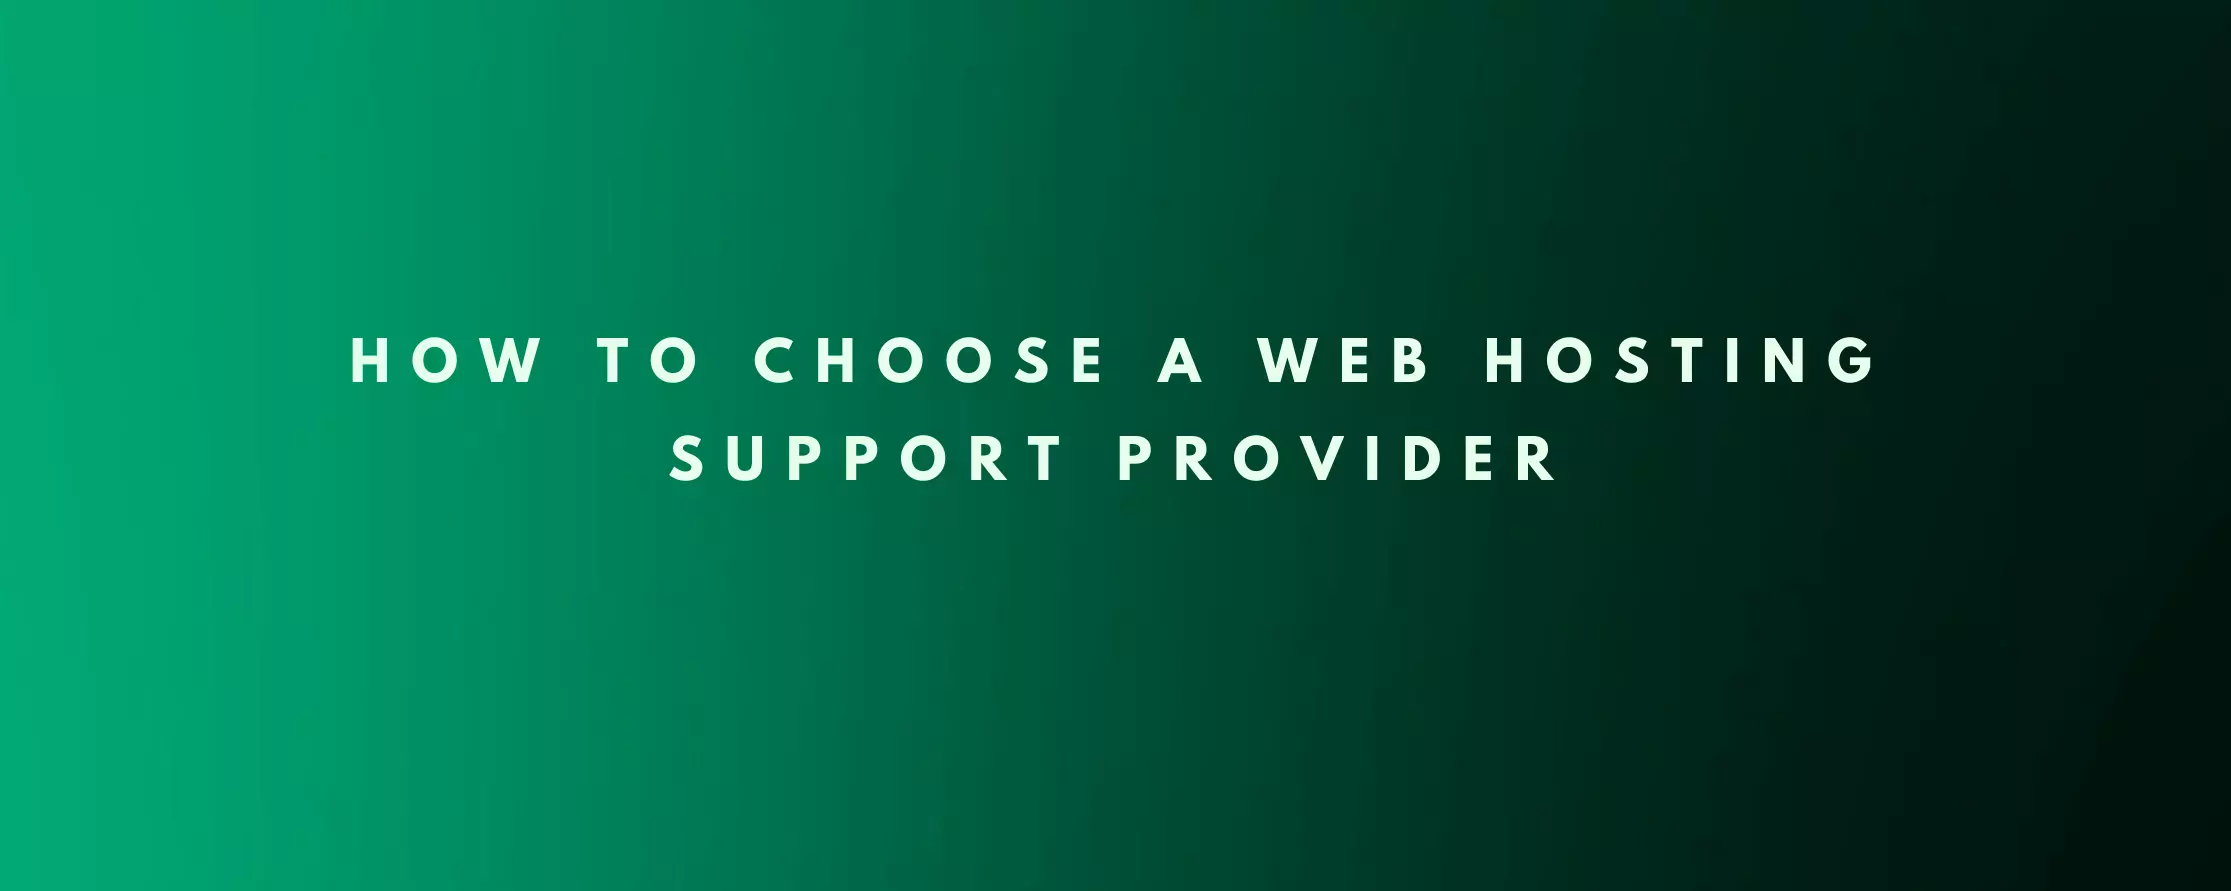 Outsourced web hosting support company